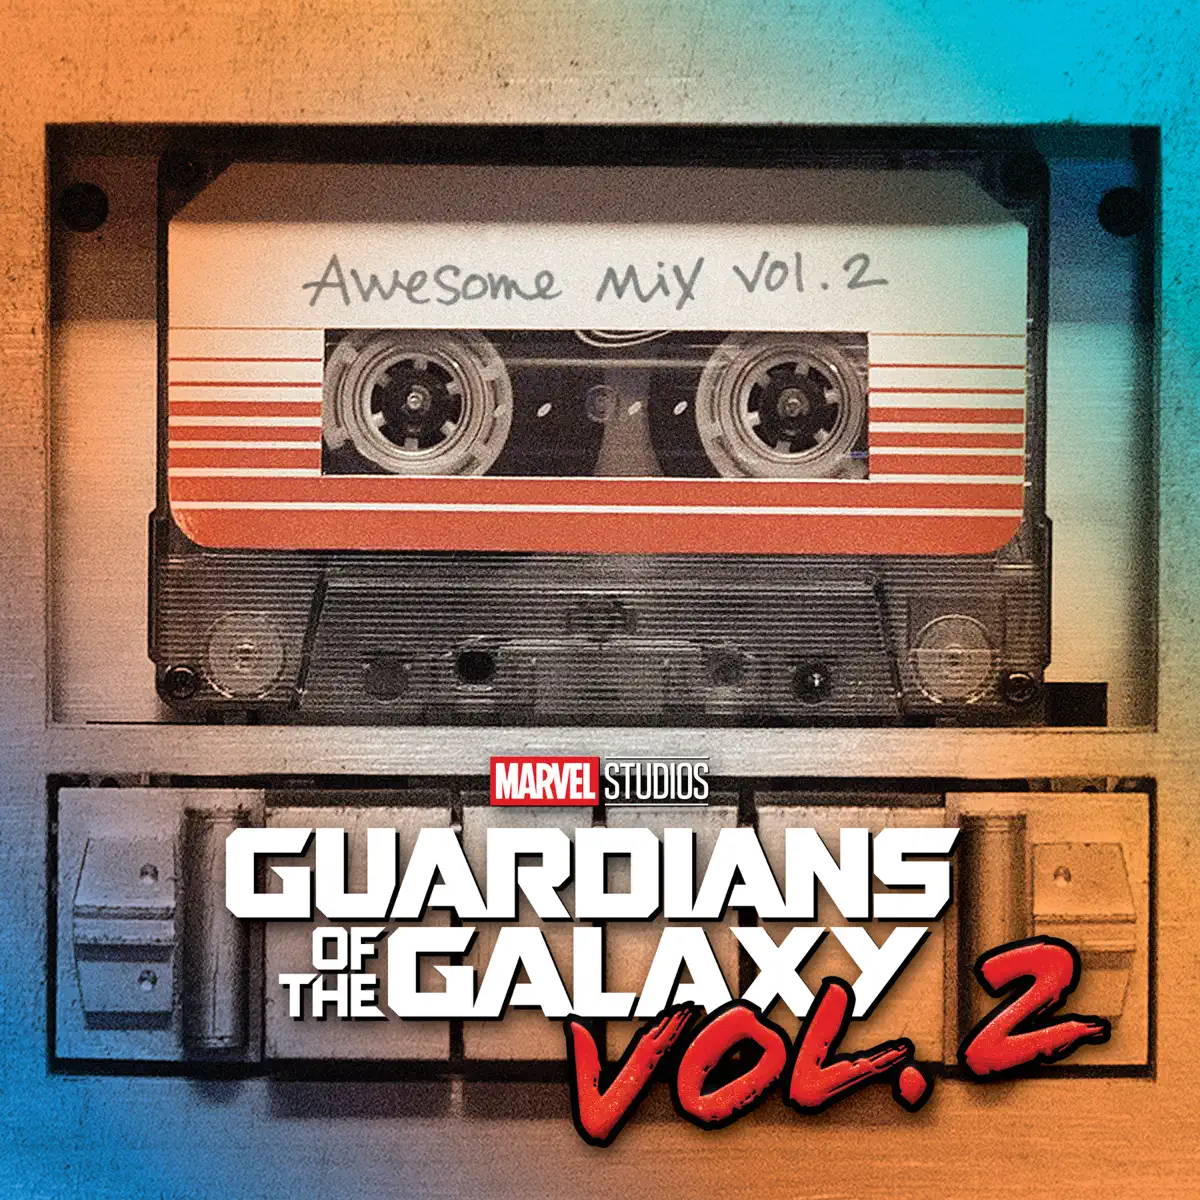 Various Artists - 银河护卫队2 Guardians of the Galaxy, Vol. 2 Awesome Mix, Vol. 2 (Original Motion Picture Soundtrack) (2017) [iTunes Plus AAC M4A]-新房子